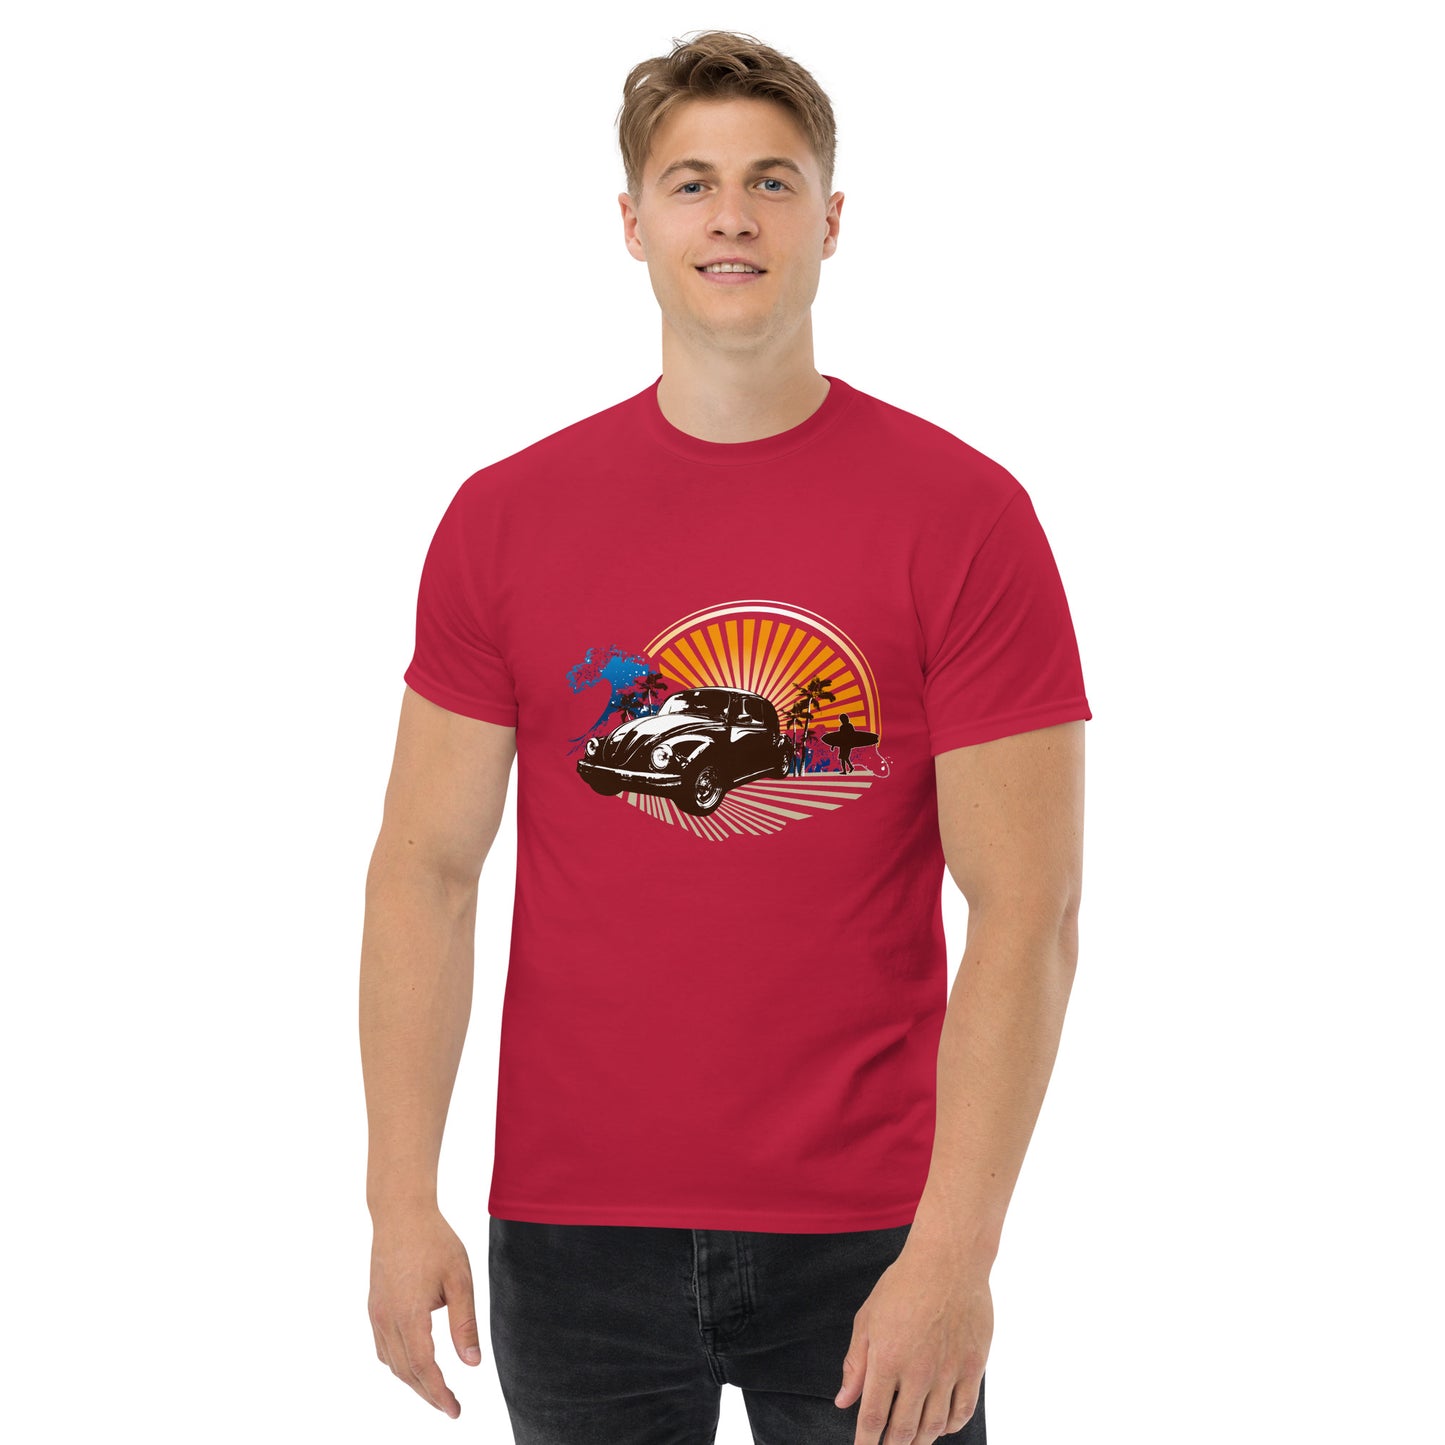 Men with cardinal red t-shirt with sunset and beetle car